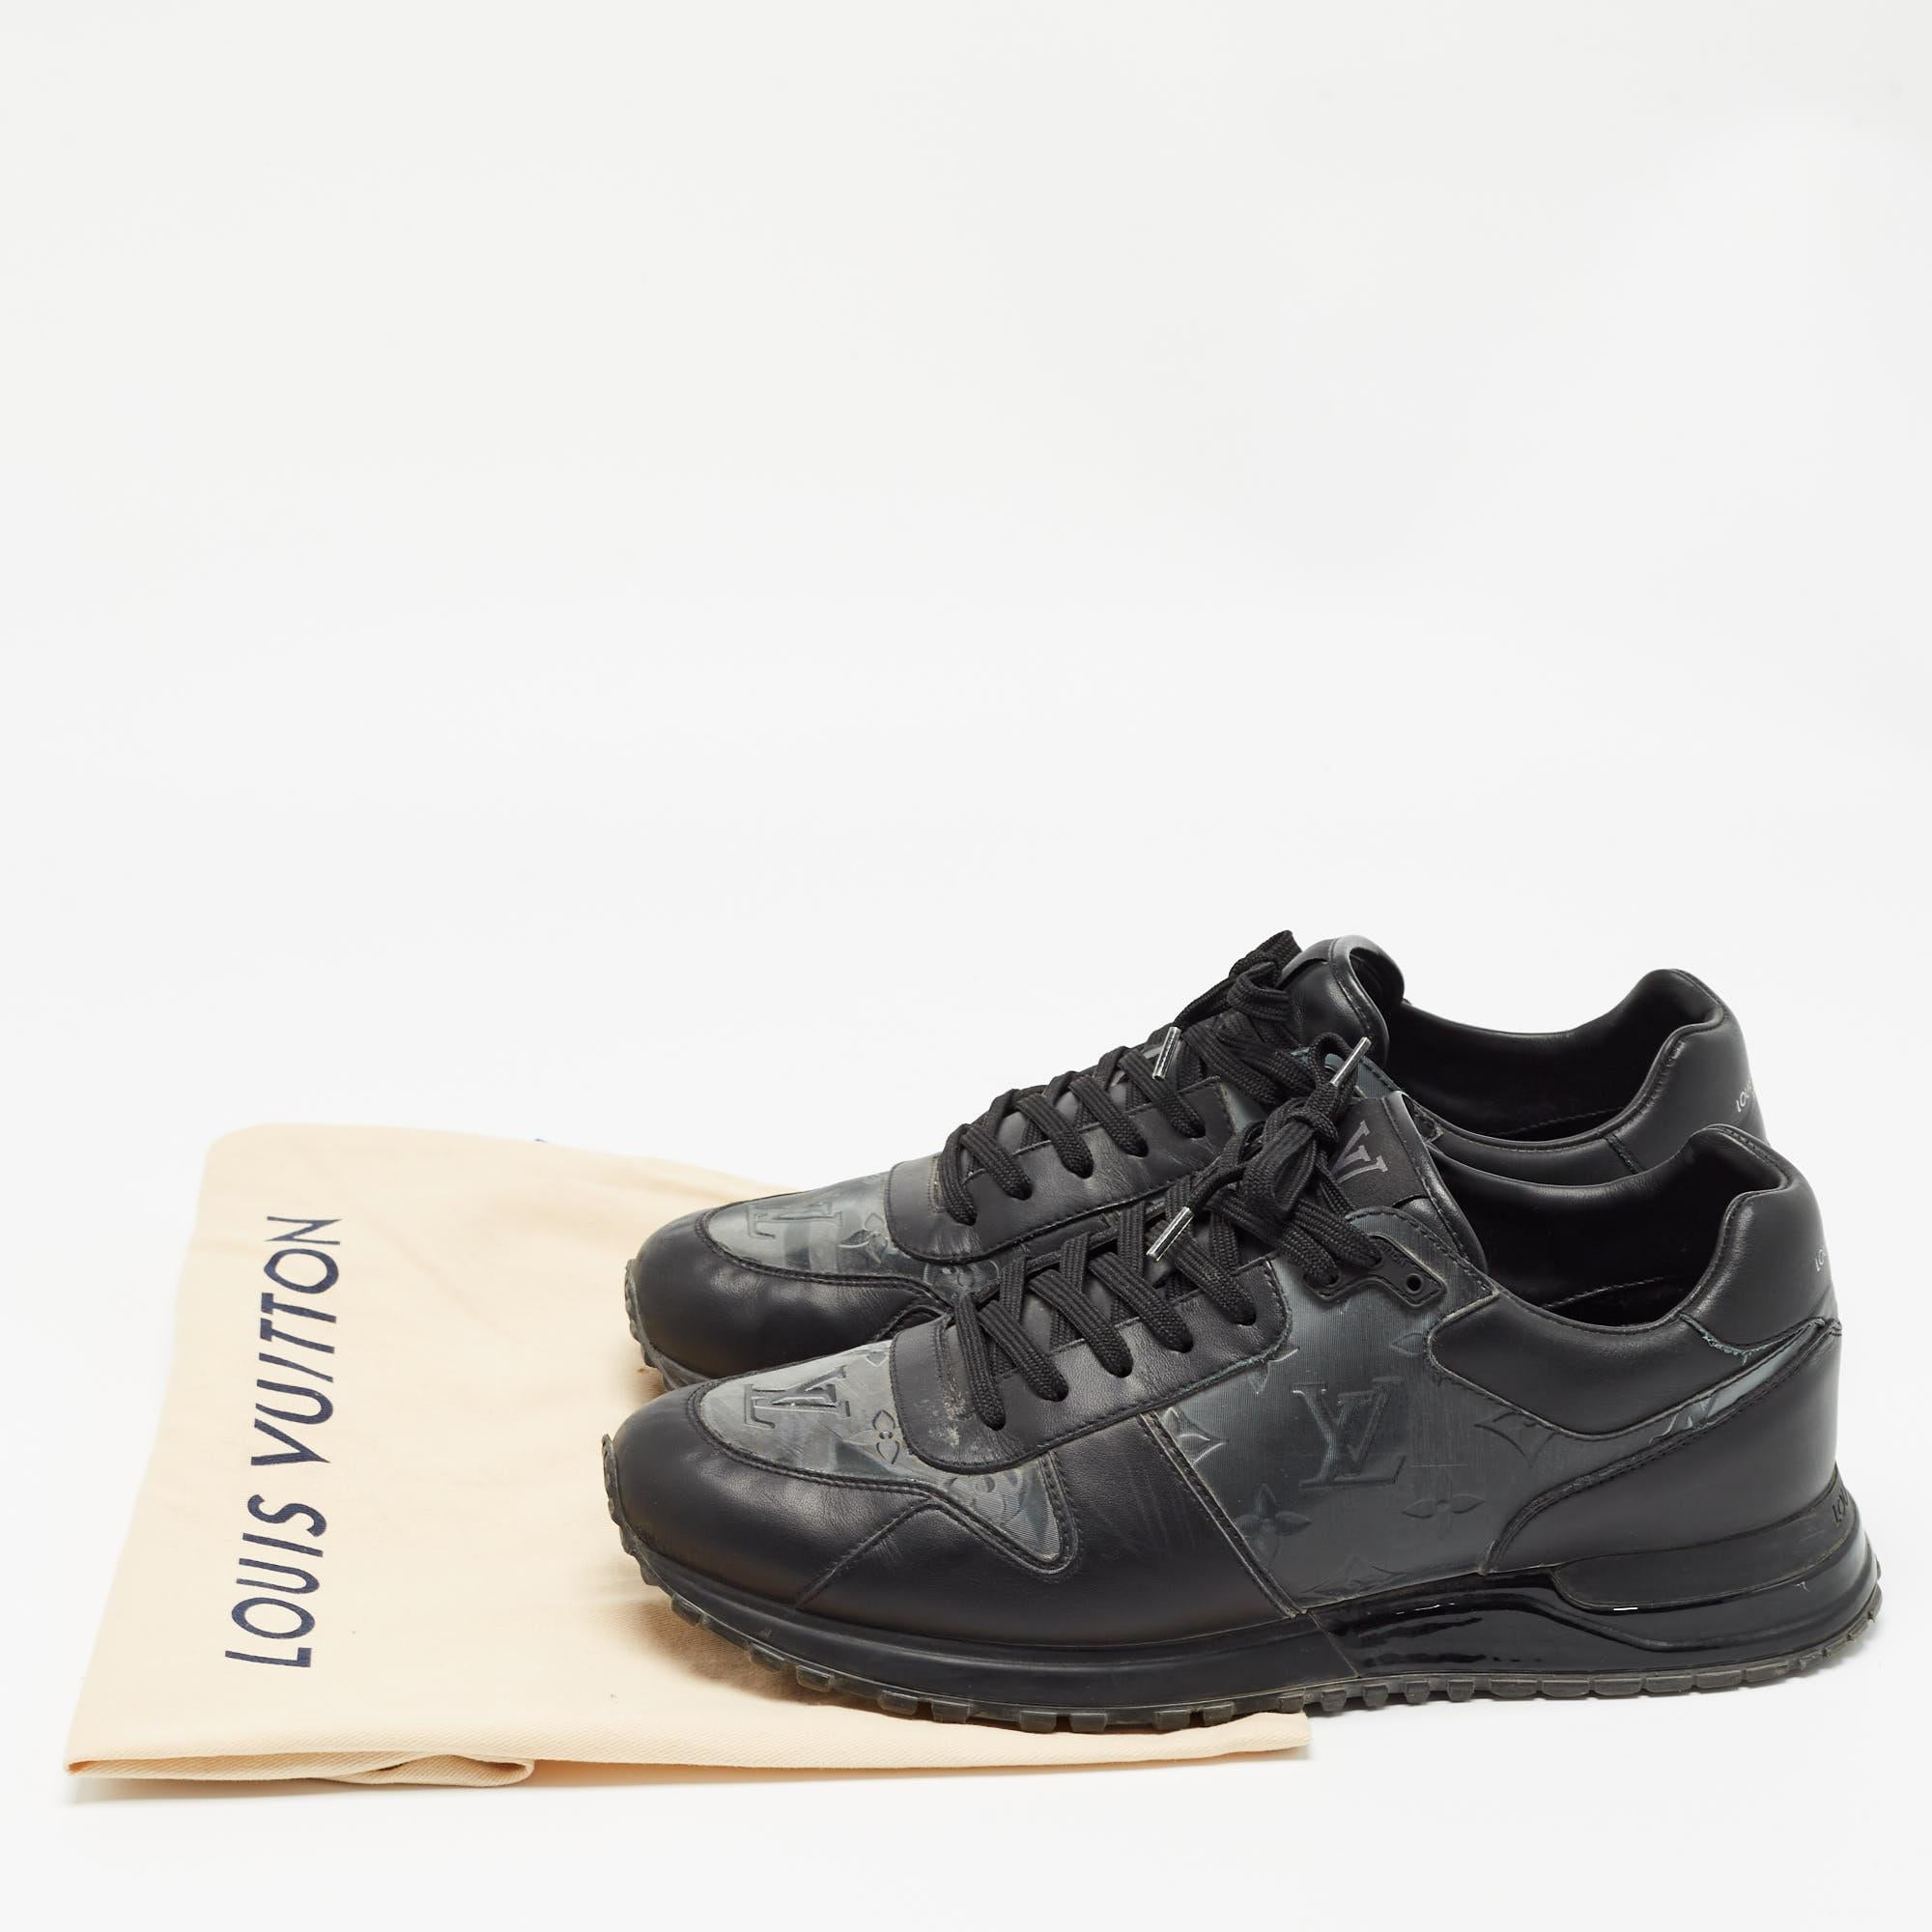 Louis Vuitton Black Monogram PVC and Leather Runaway Sneakers Size 41.5 For Sale 3